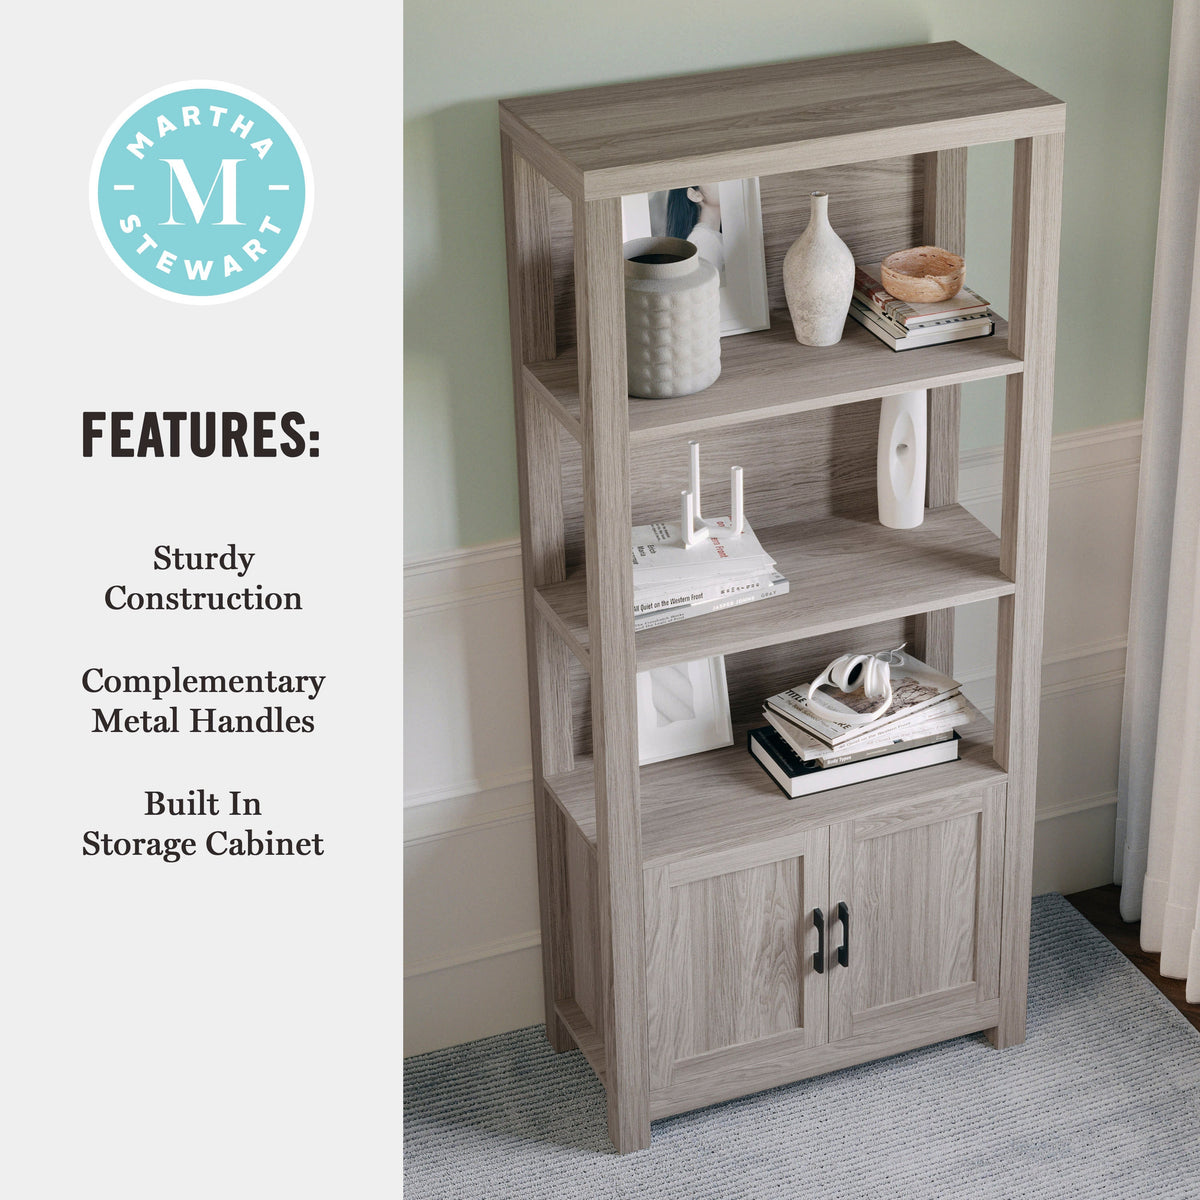 Gray Frame/Oil Rubbed Bronze Hardware |#| Gray 4 Tier Shaker Style Bookcase with Cabinet and Oil Rubbed Bronze Hardware